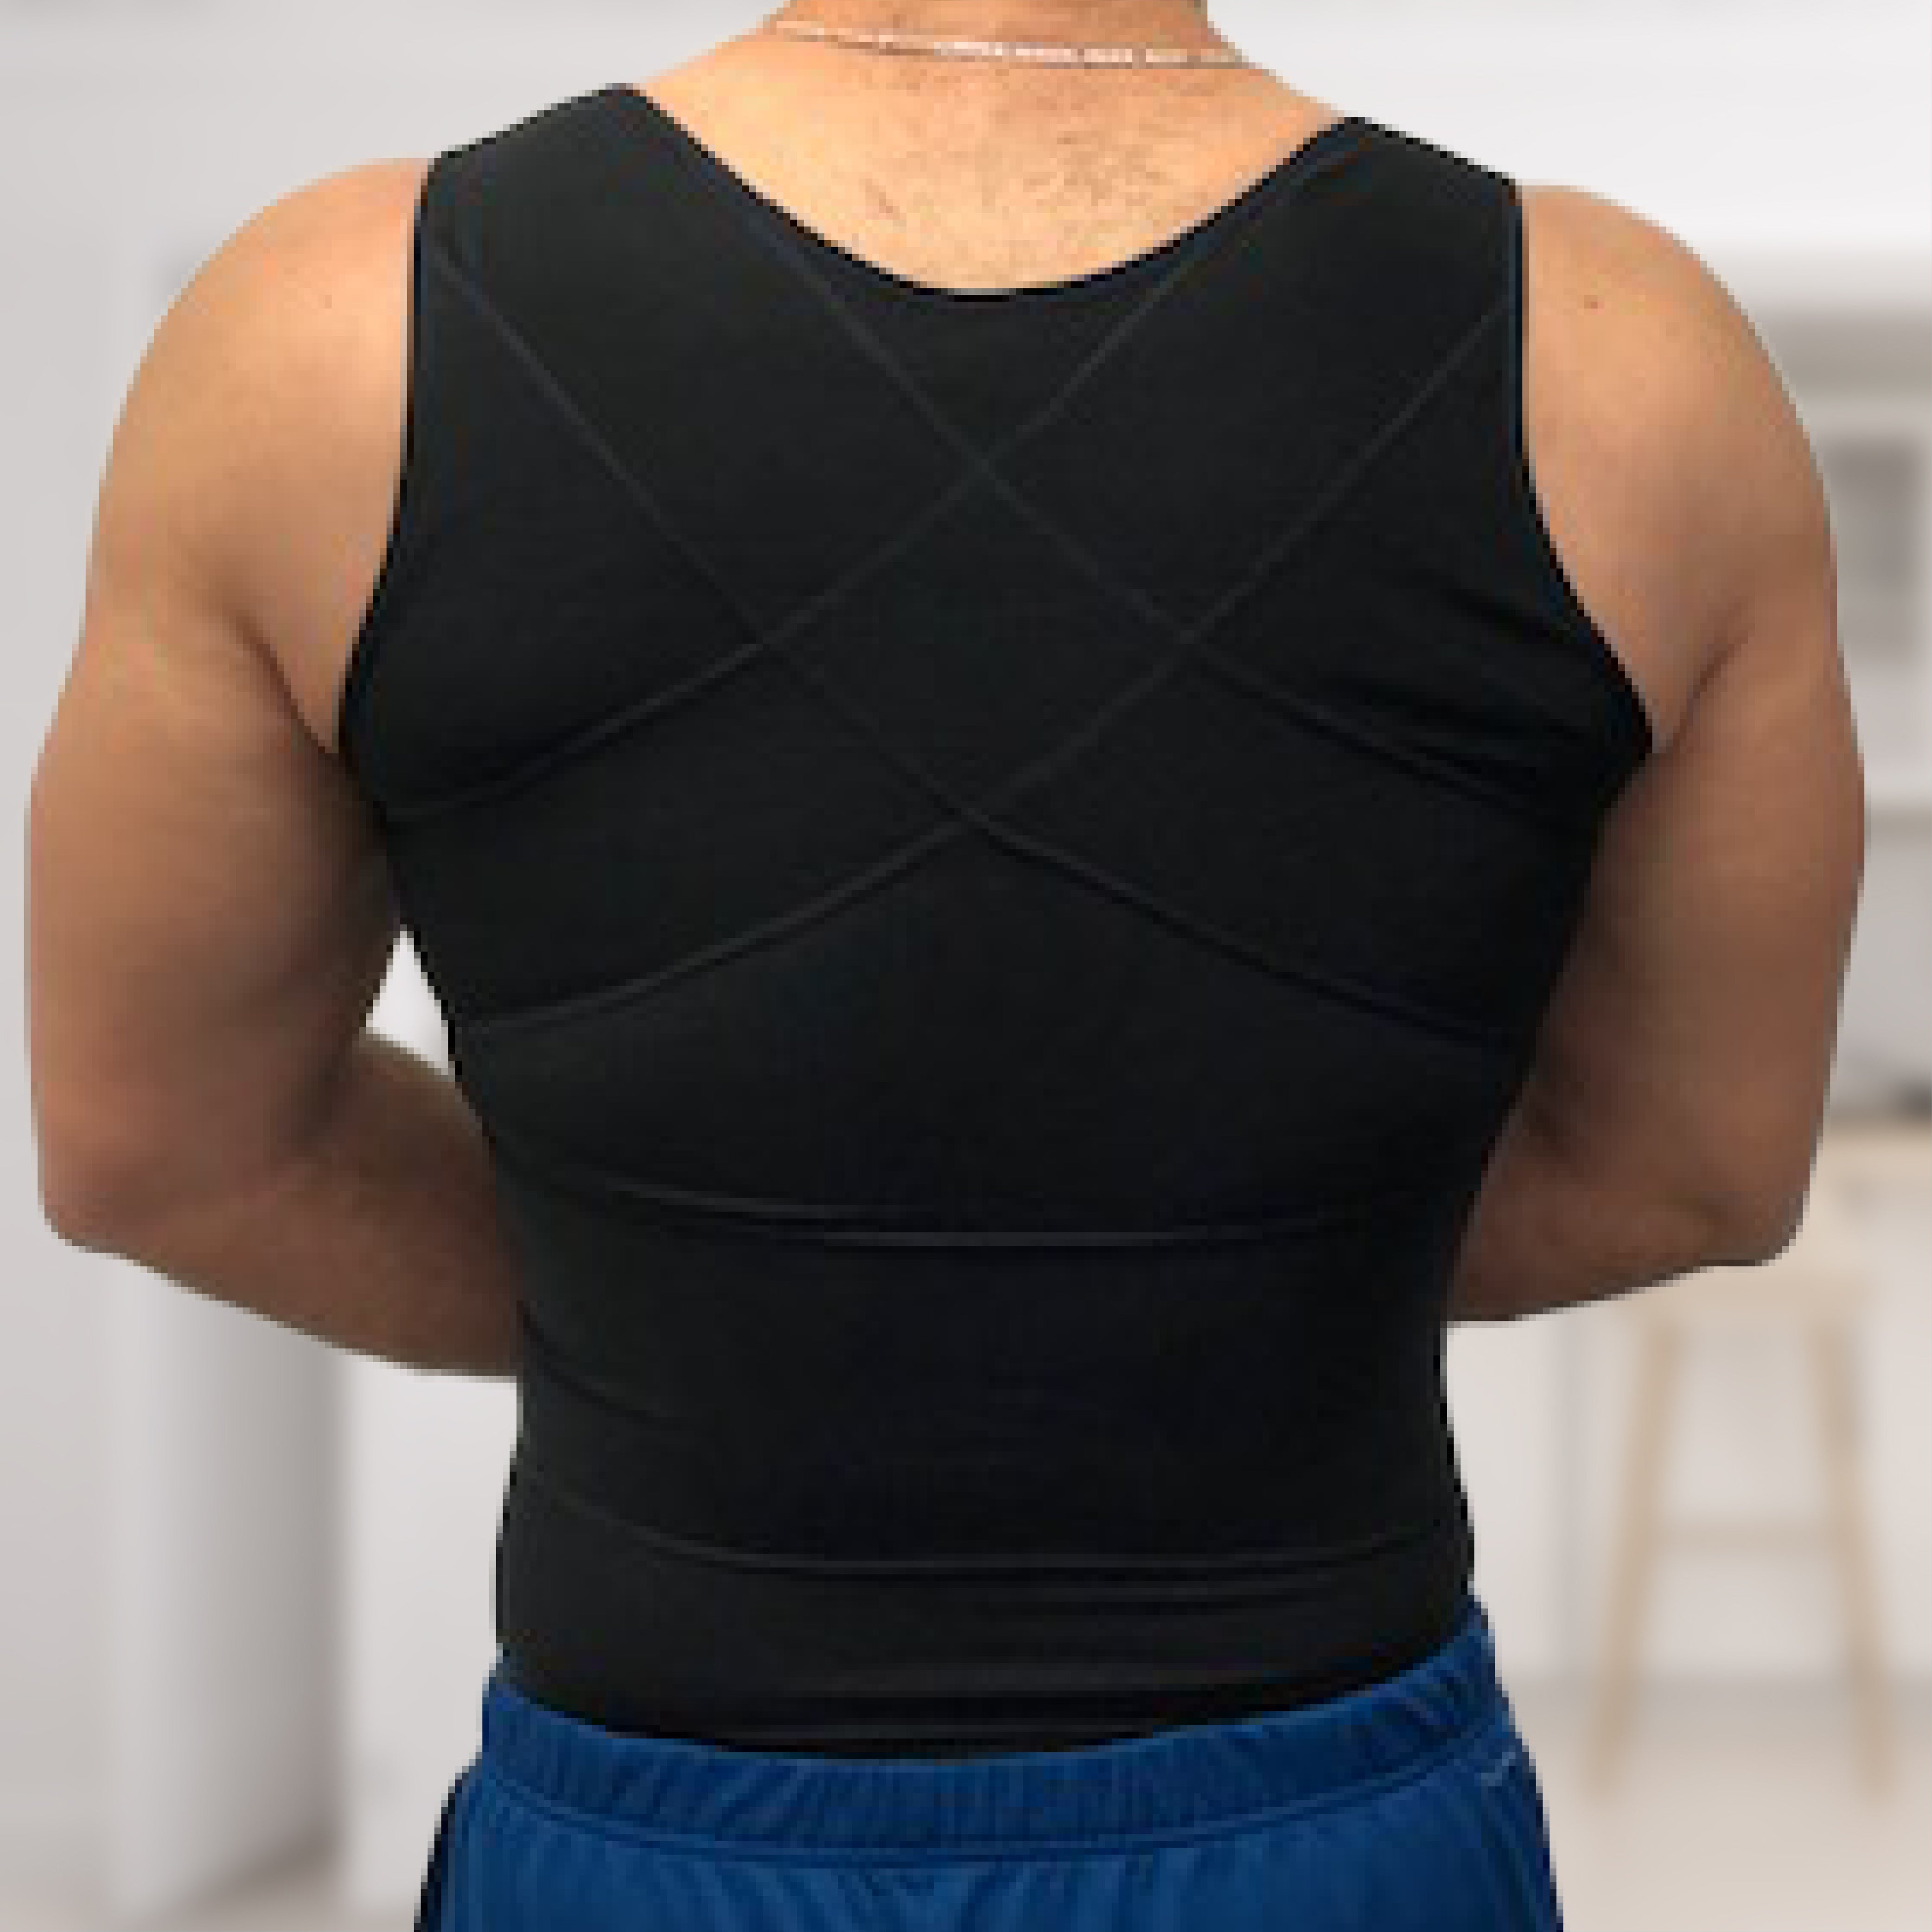 Man with black compression vest on - back view